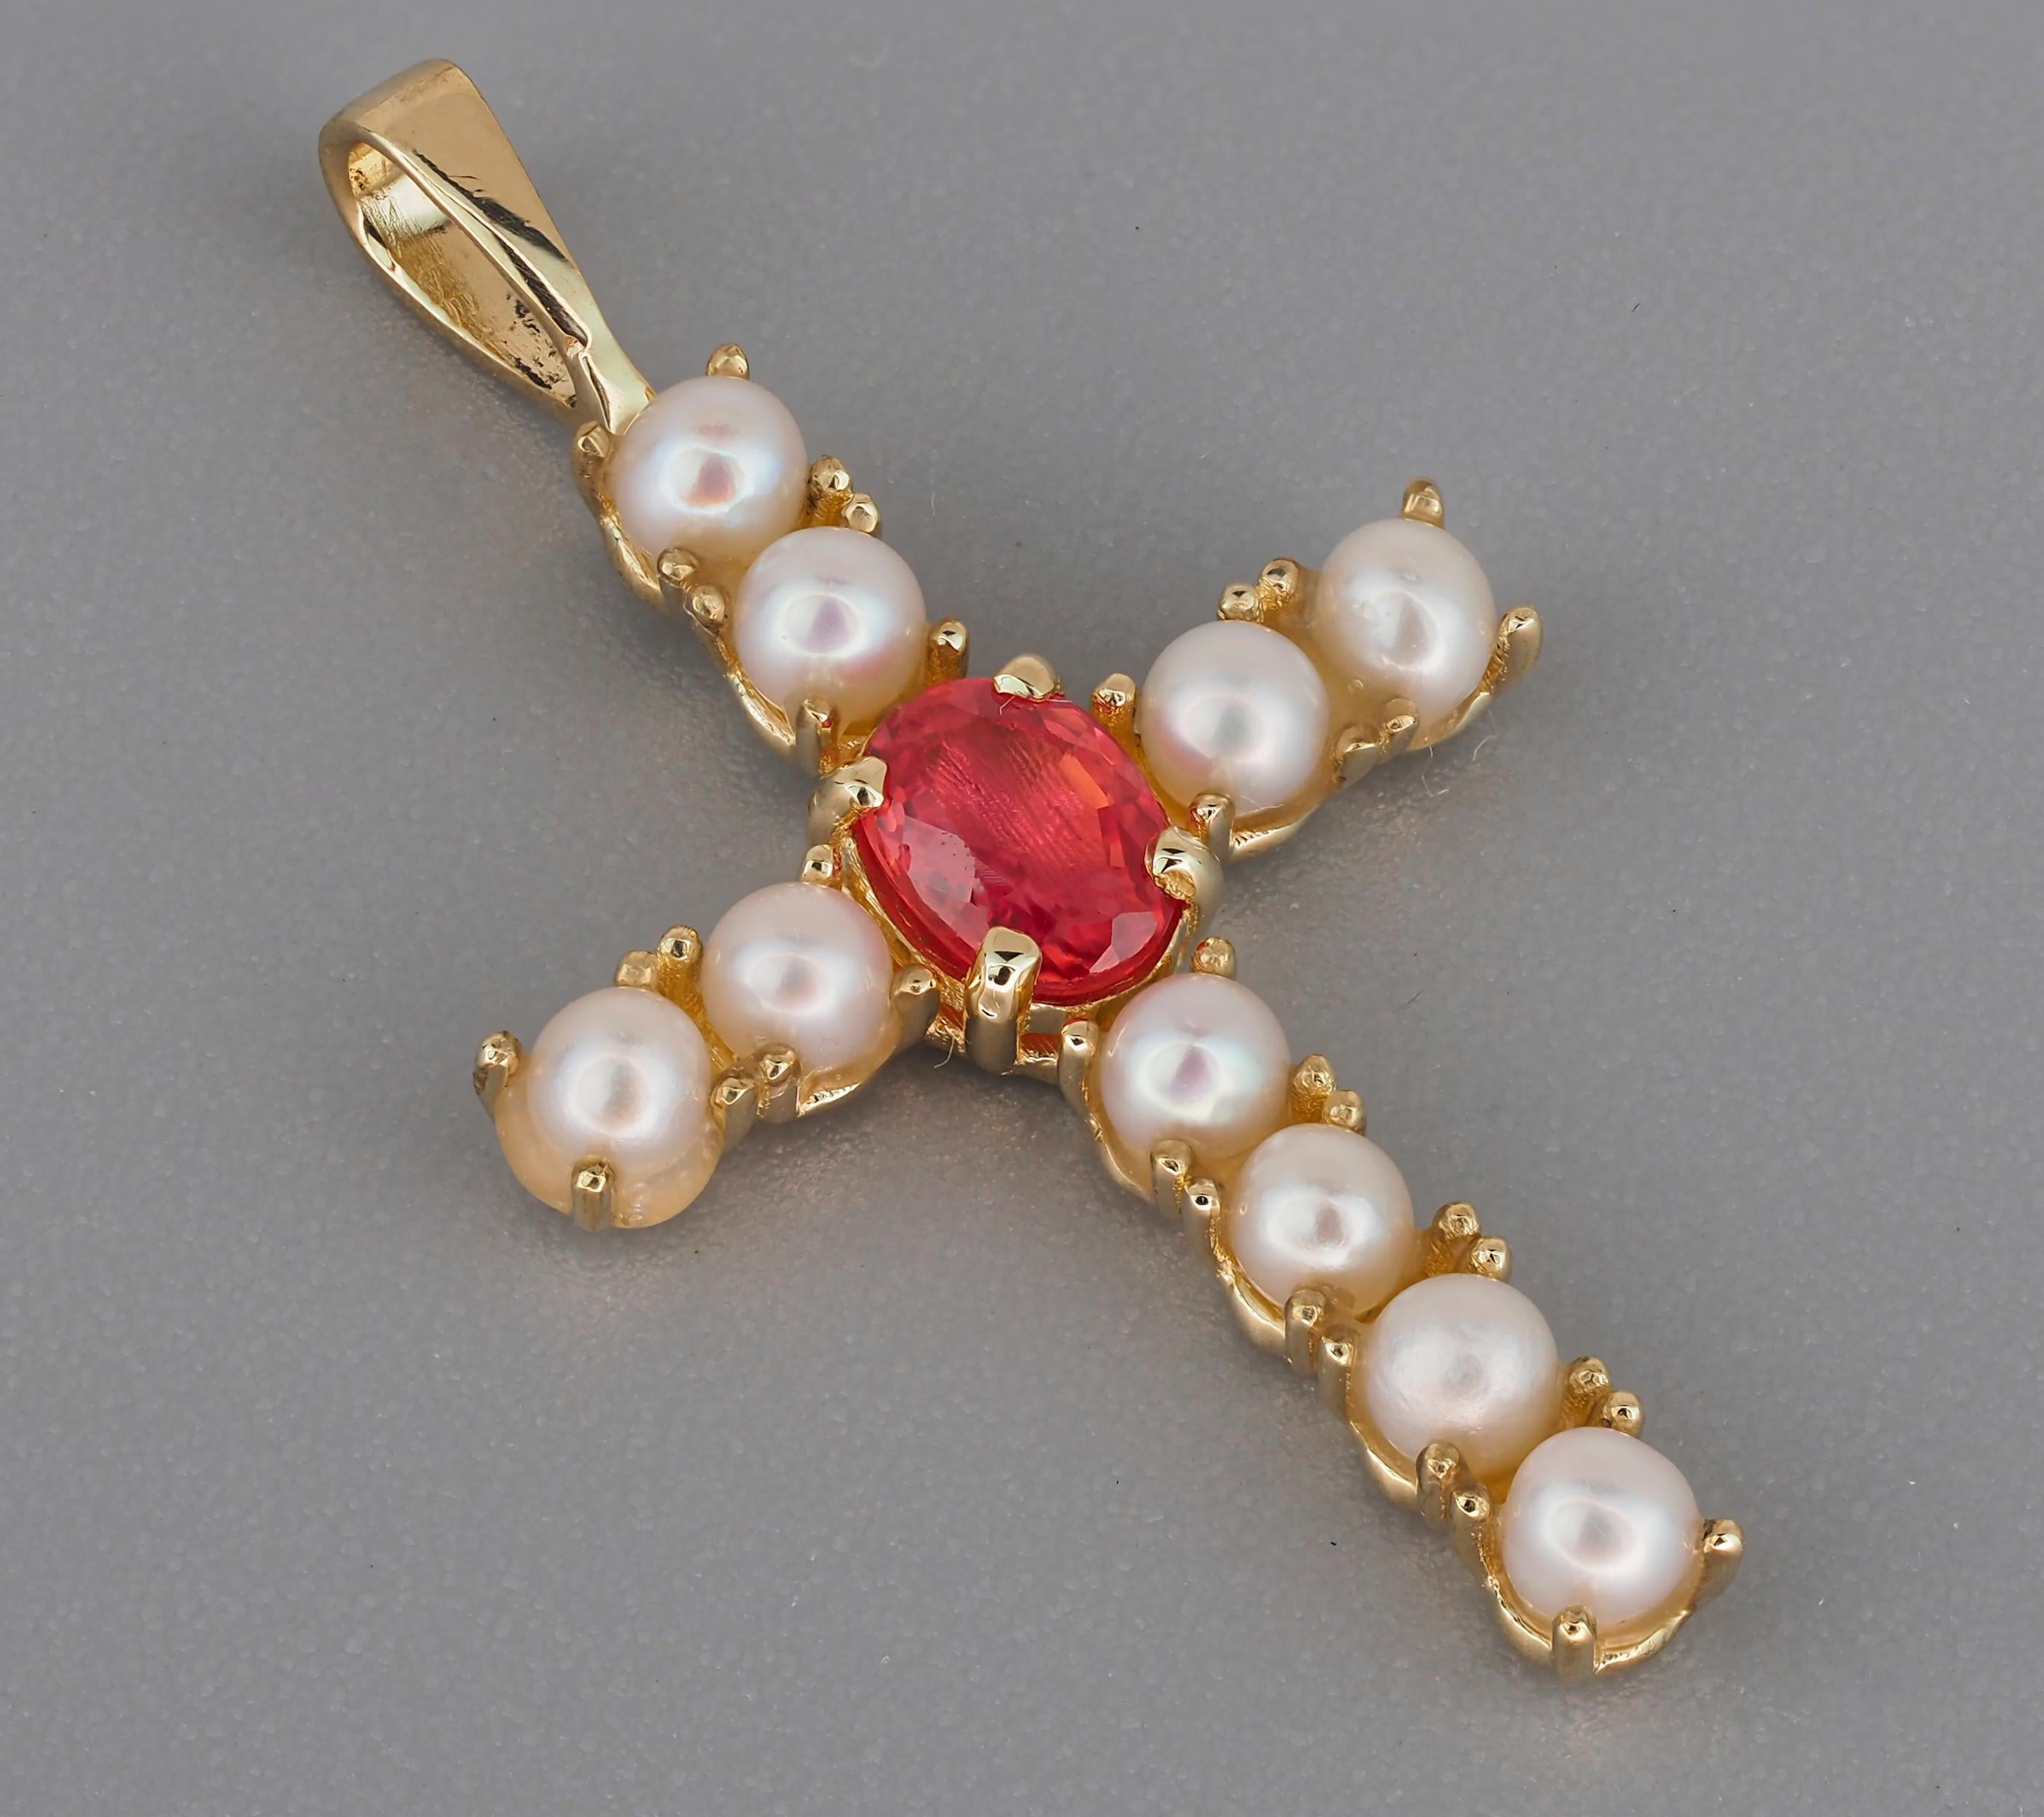 Gold cross pendant with sapphire and pearls. Sapphire cross pendant in 14k gold. Sapphire and pearls gold cross. Christmas gift for her
Weight: 1.2 g.
Gold - 14k gold 
Size: 24.5x13 mm
Stones:
Set with sapphire, color - orange pink
oval cut, 0,4